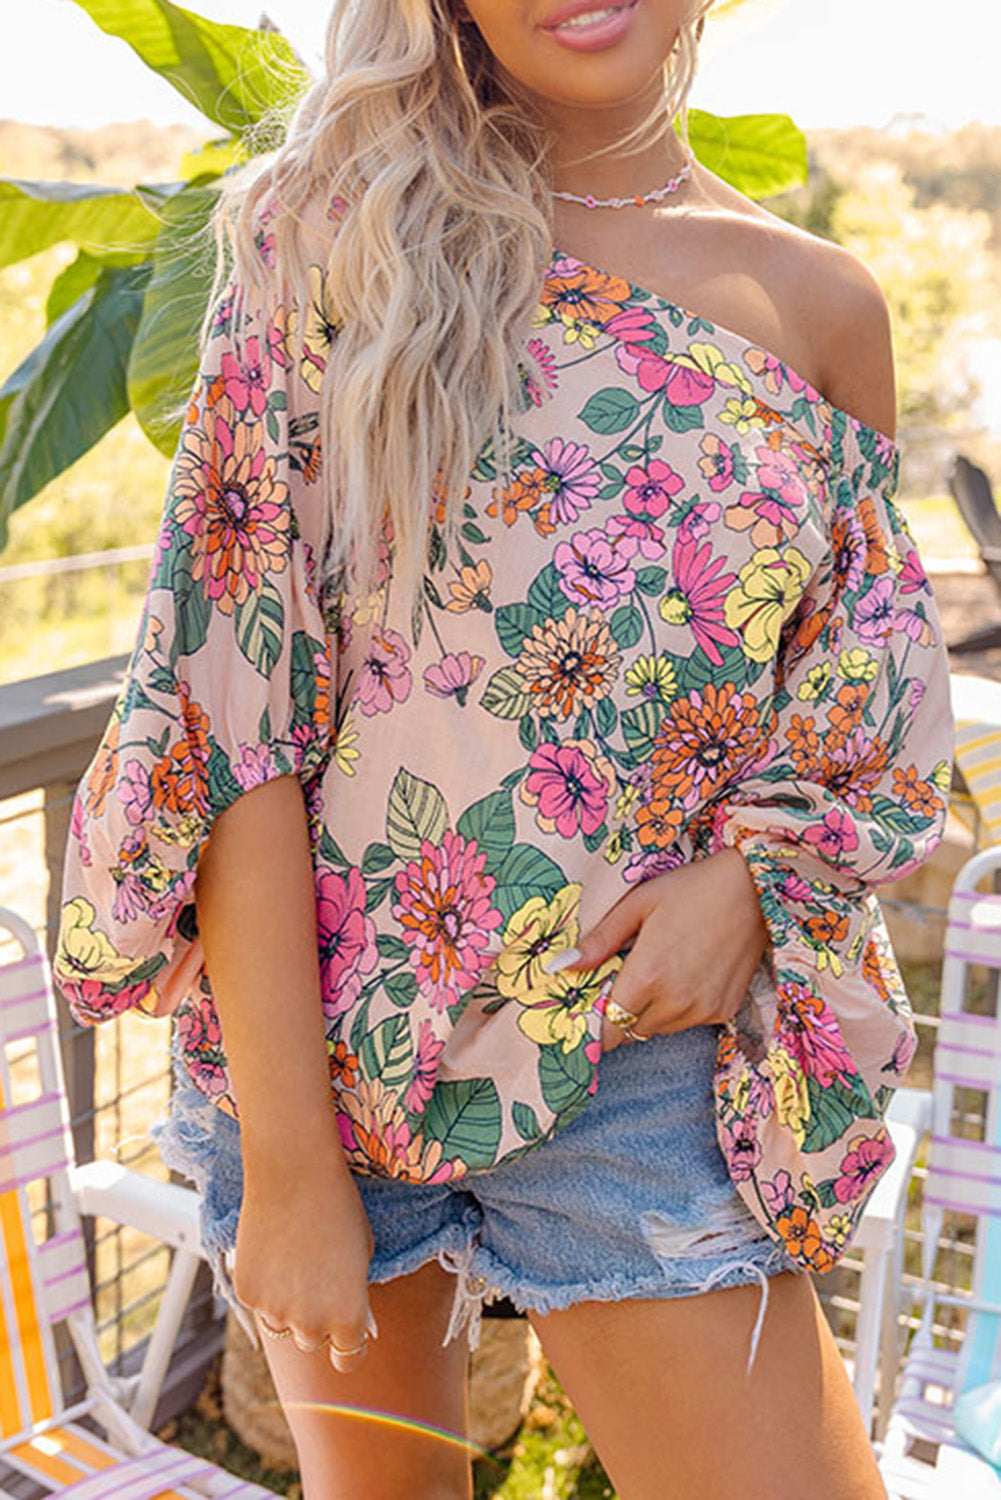 Colored Drawing Flowers Sexy Off Shoulder Top